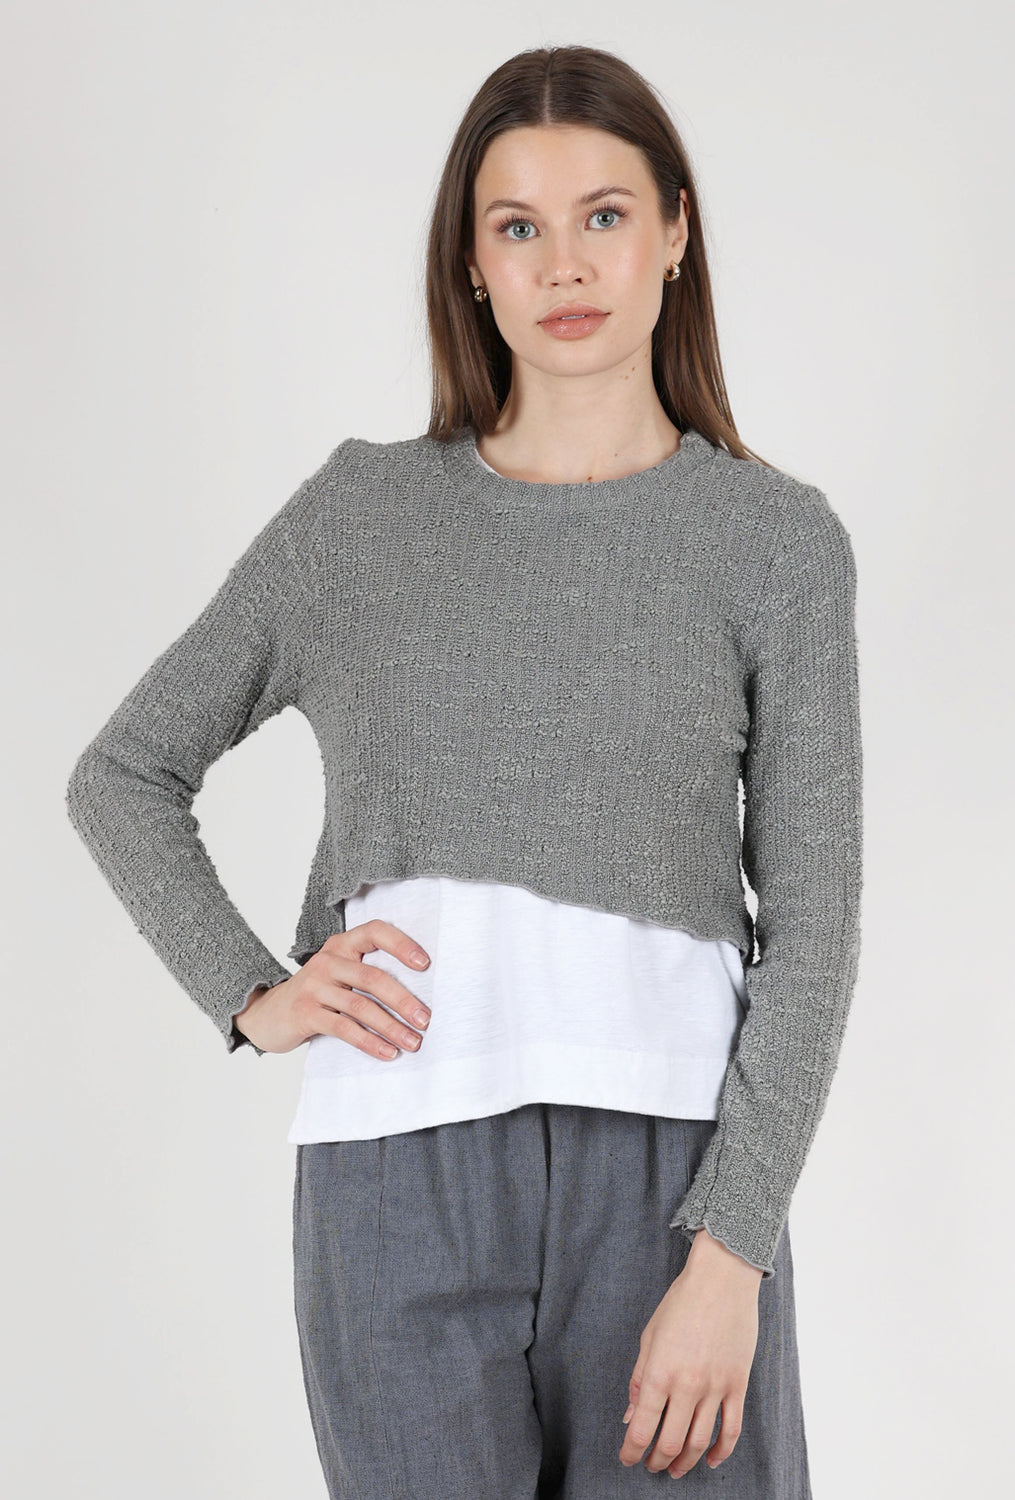 Cut Loose Texture Curved Crop Sweater, Cobblestone Gray 